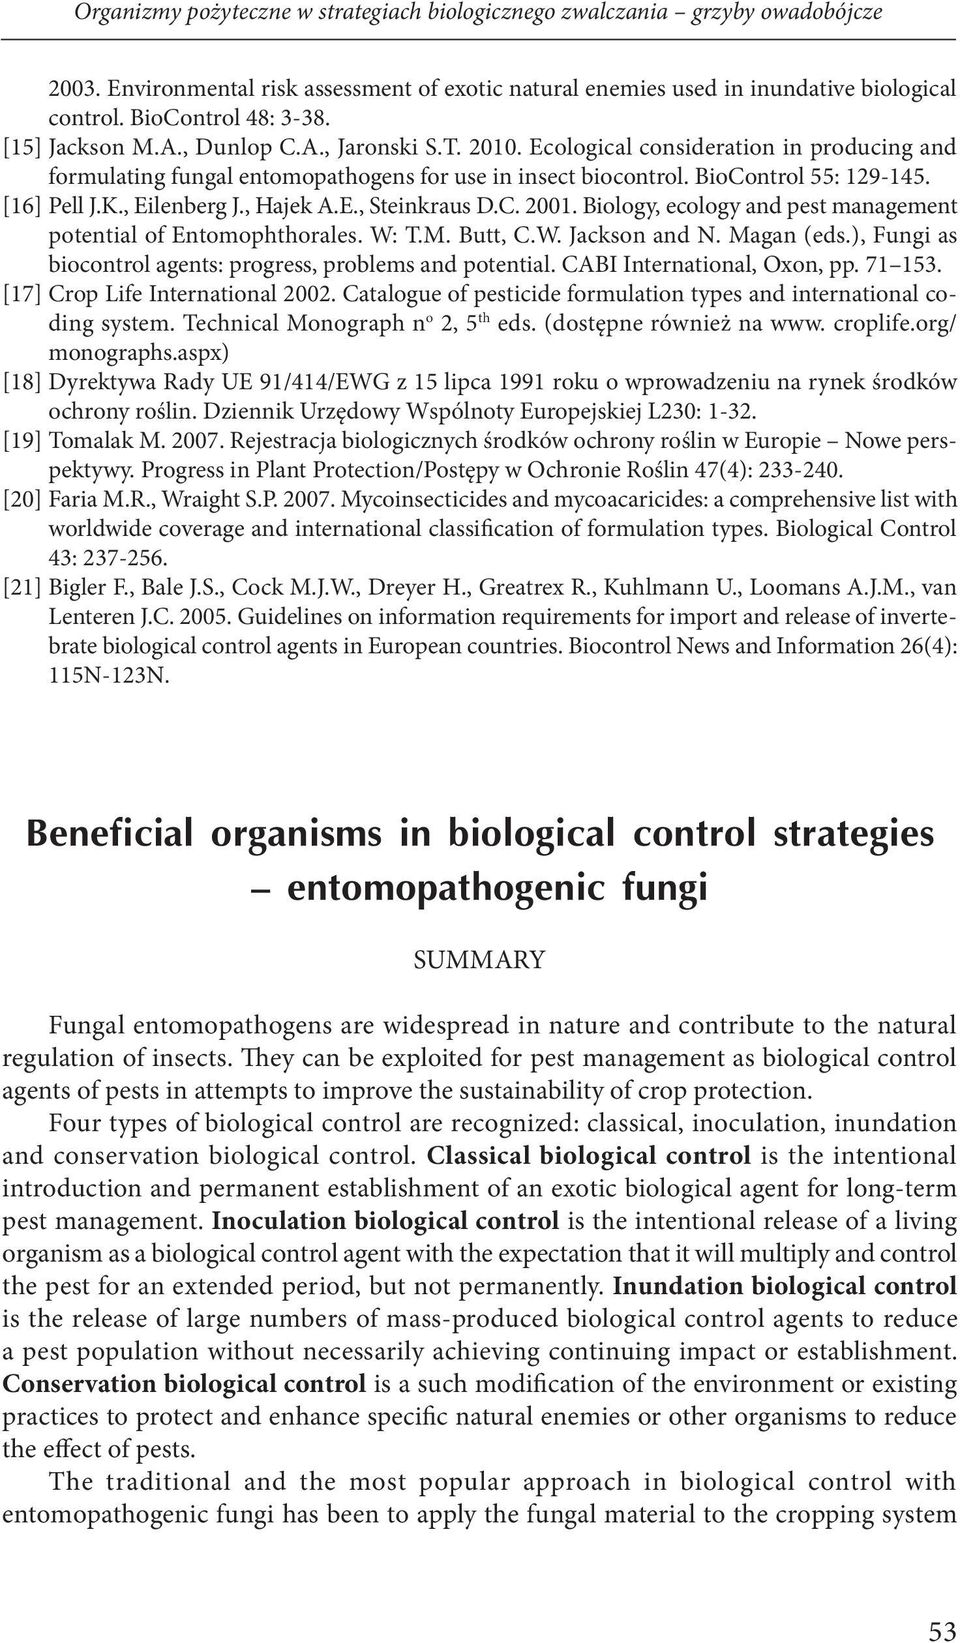 , Eilenberg J., Hajek A.E., Steinkraus D.C. 2001. Biology, ecology and pest management potential of Entomophthorales. W: T.M. Butt, C.W. Jackson and N. Magan (eds.